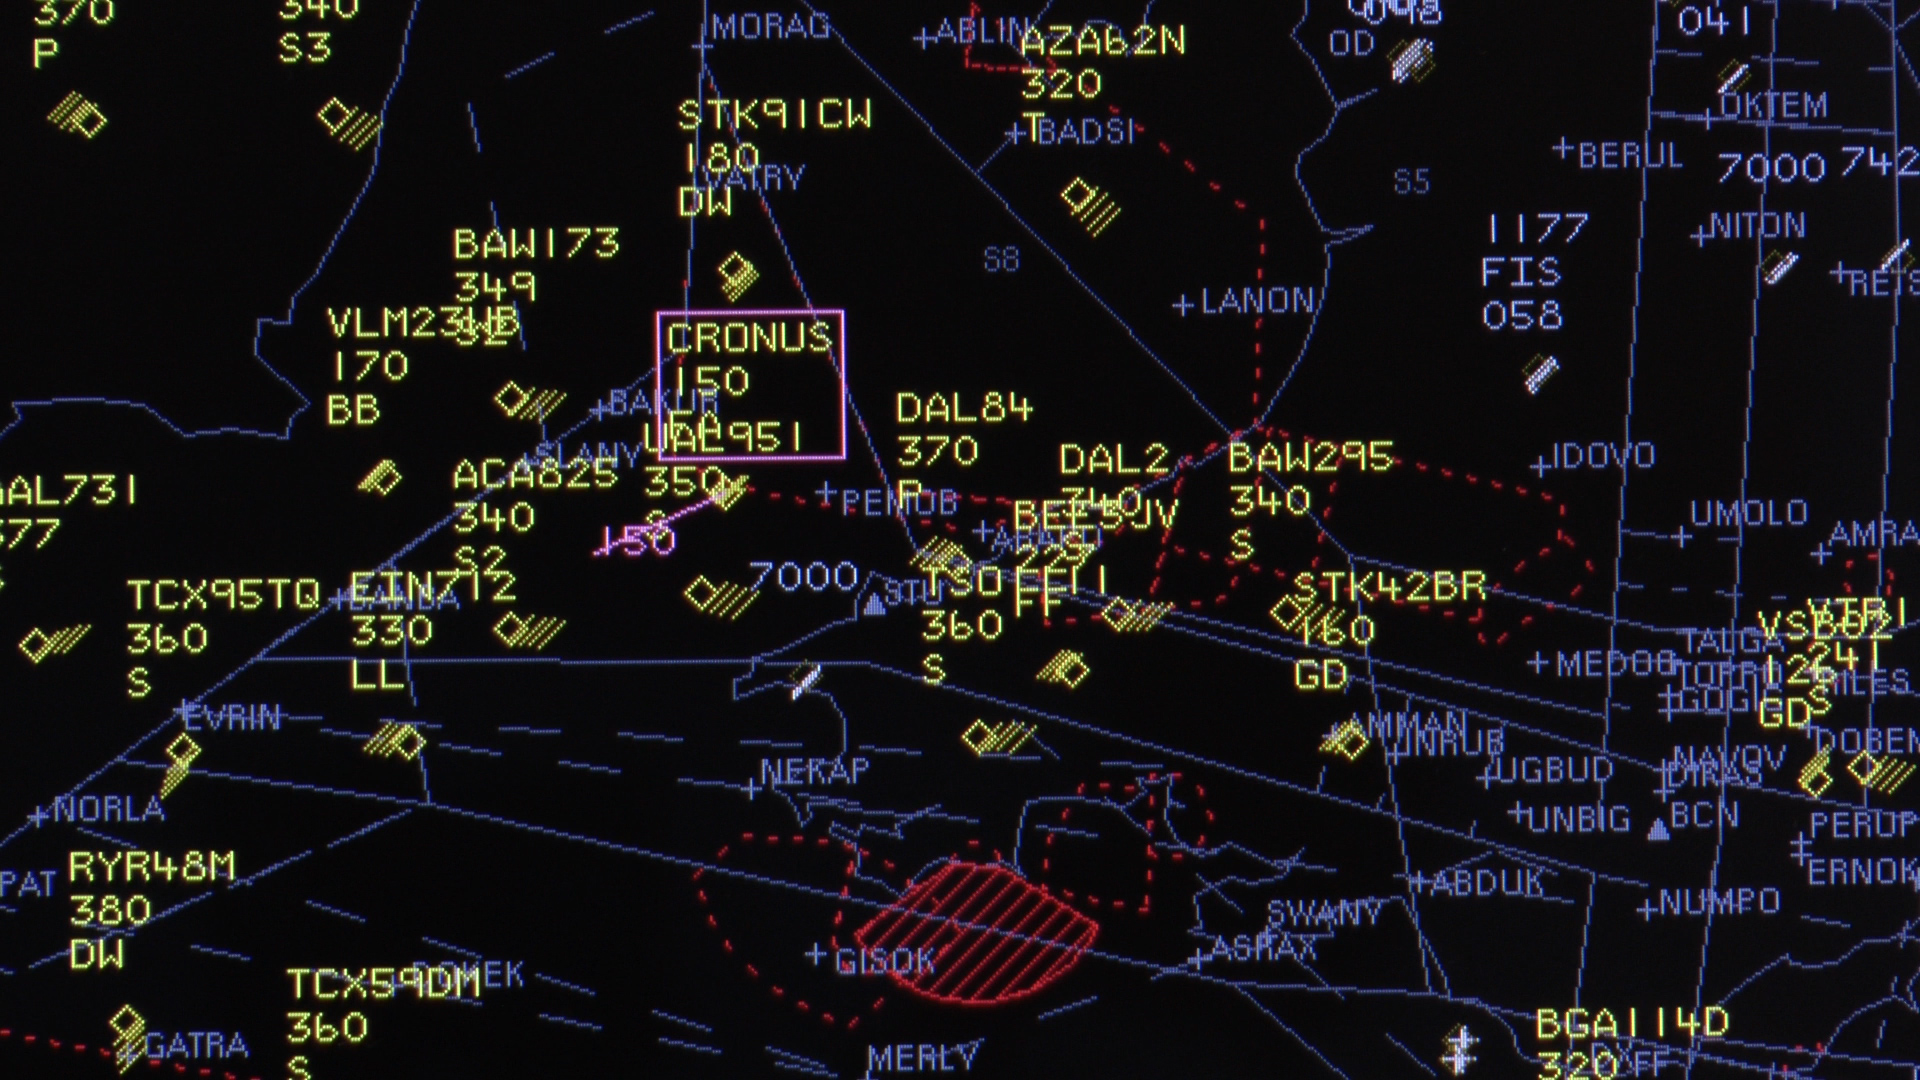 A still from the radar screen clearly showing the UAS - CRONUS - operating in the same airspace as conventional aircraft.